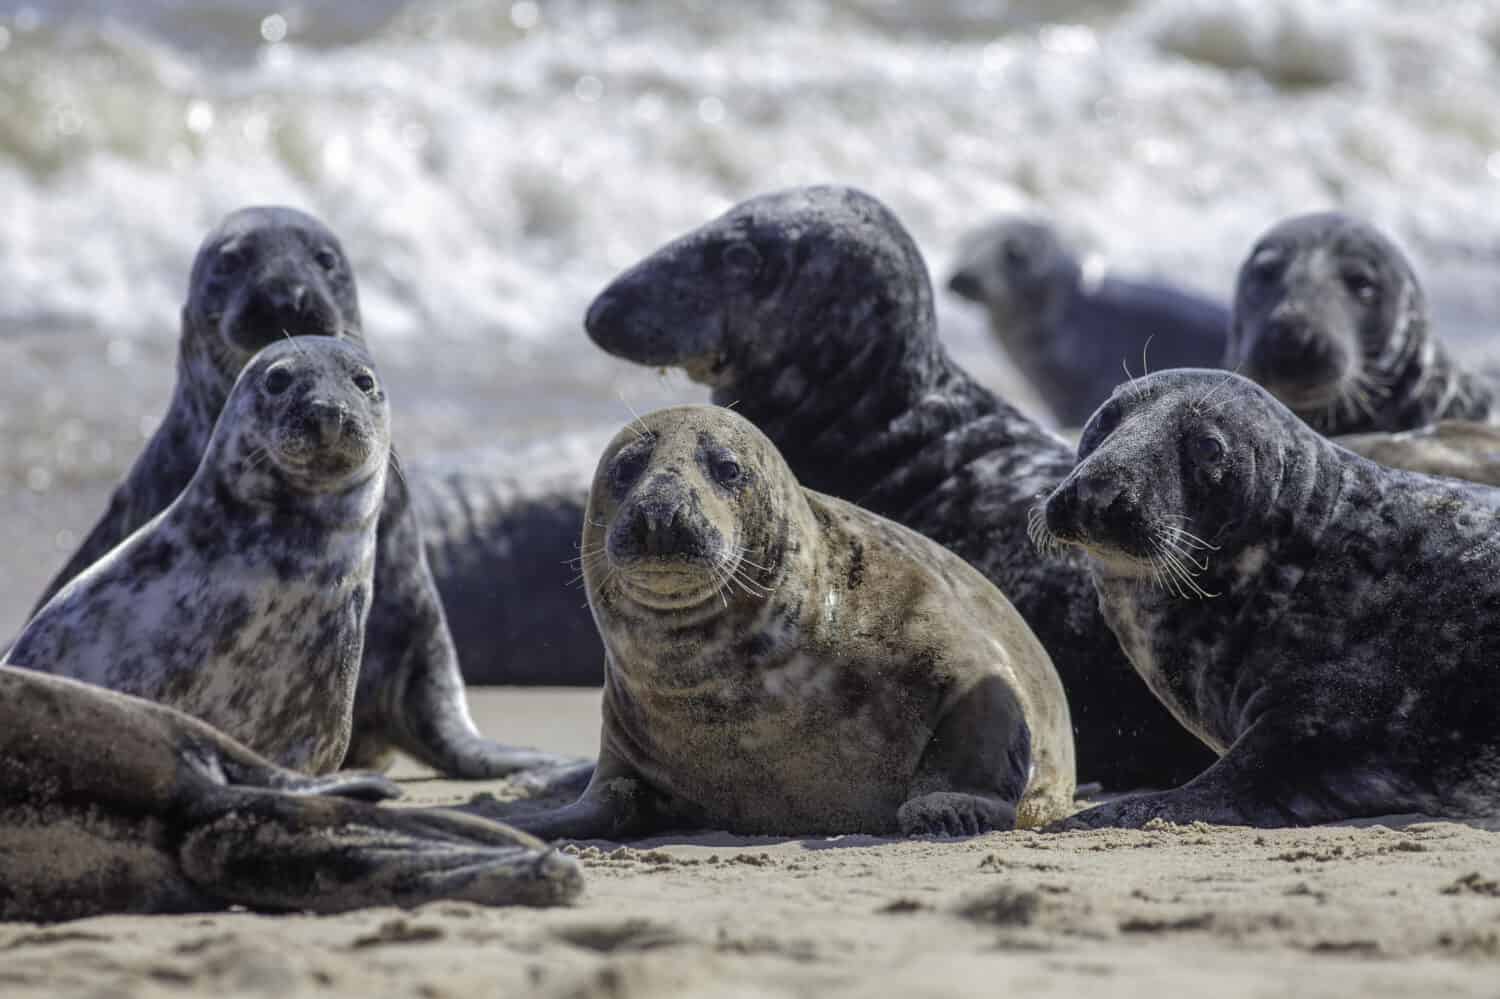 Wild Grey seal colony on the beach at Horsey UK. Beautiful aquatic animal group with various shapes and sizes of gray seal. Selective focus on foreground seals.